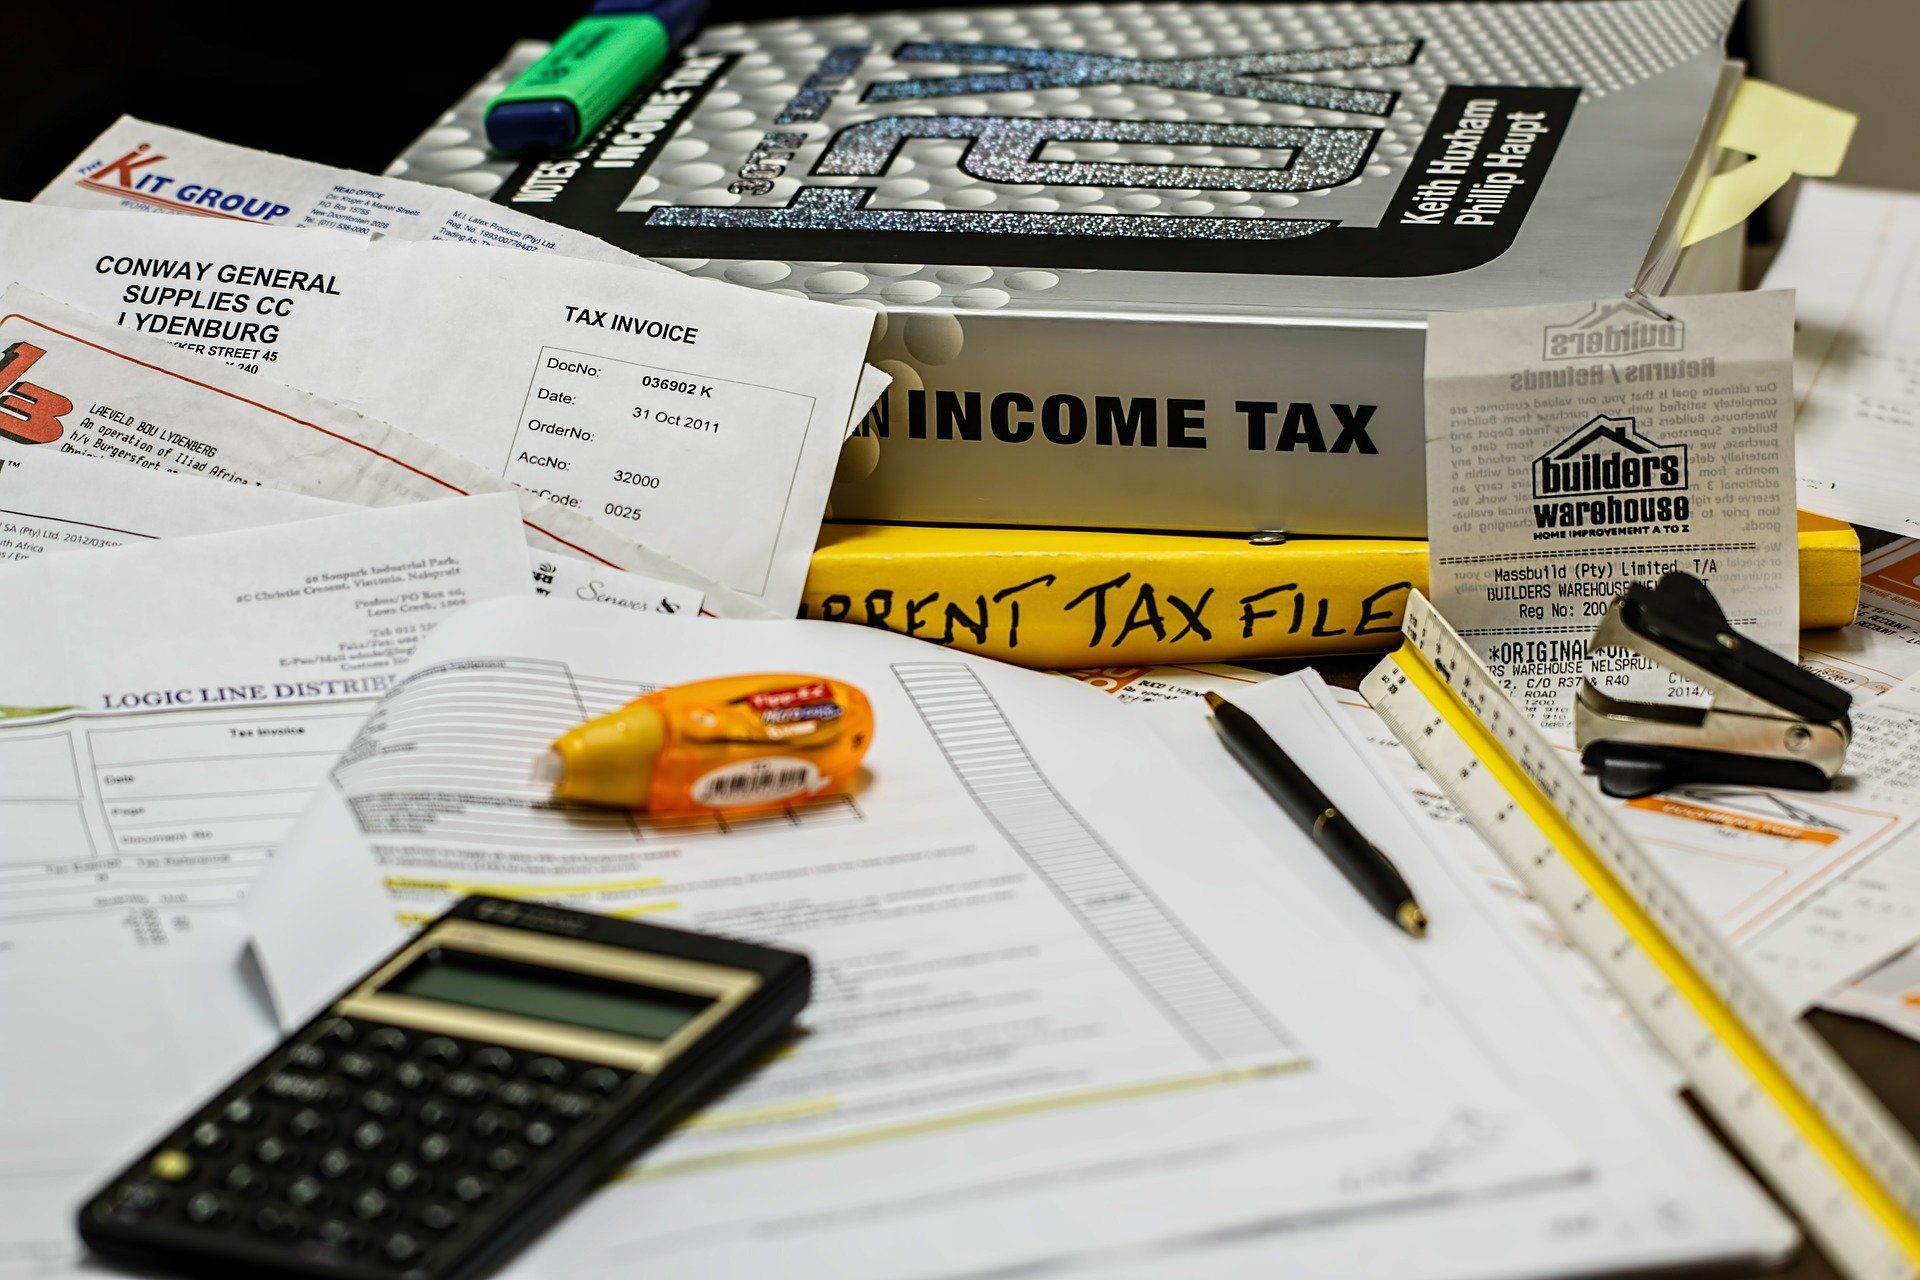 Tax documents and a calculator on a desk